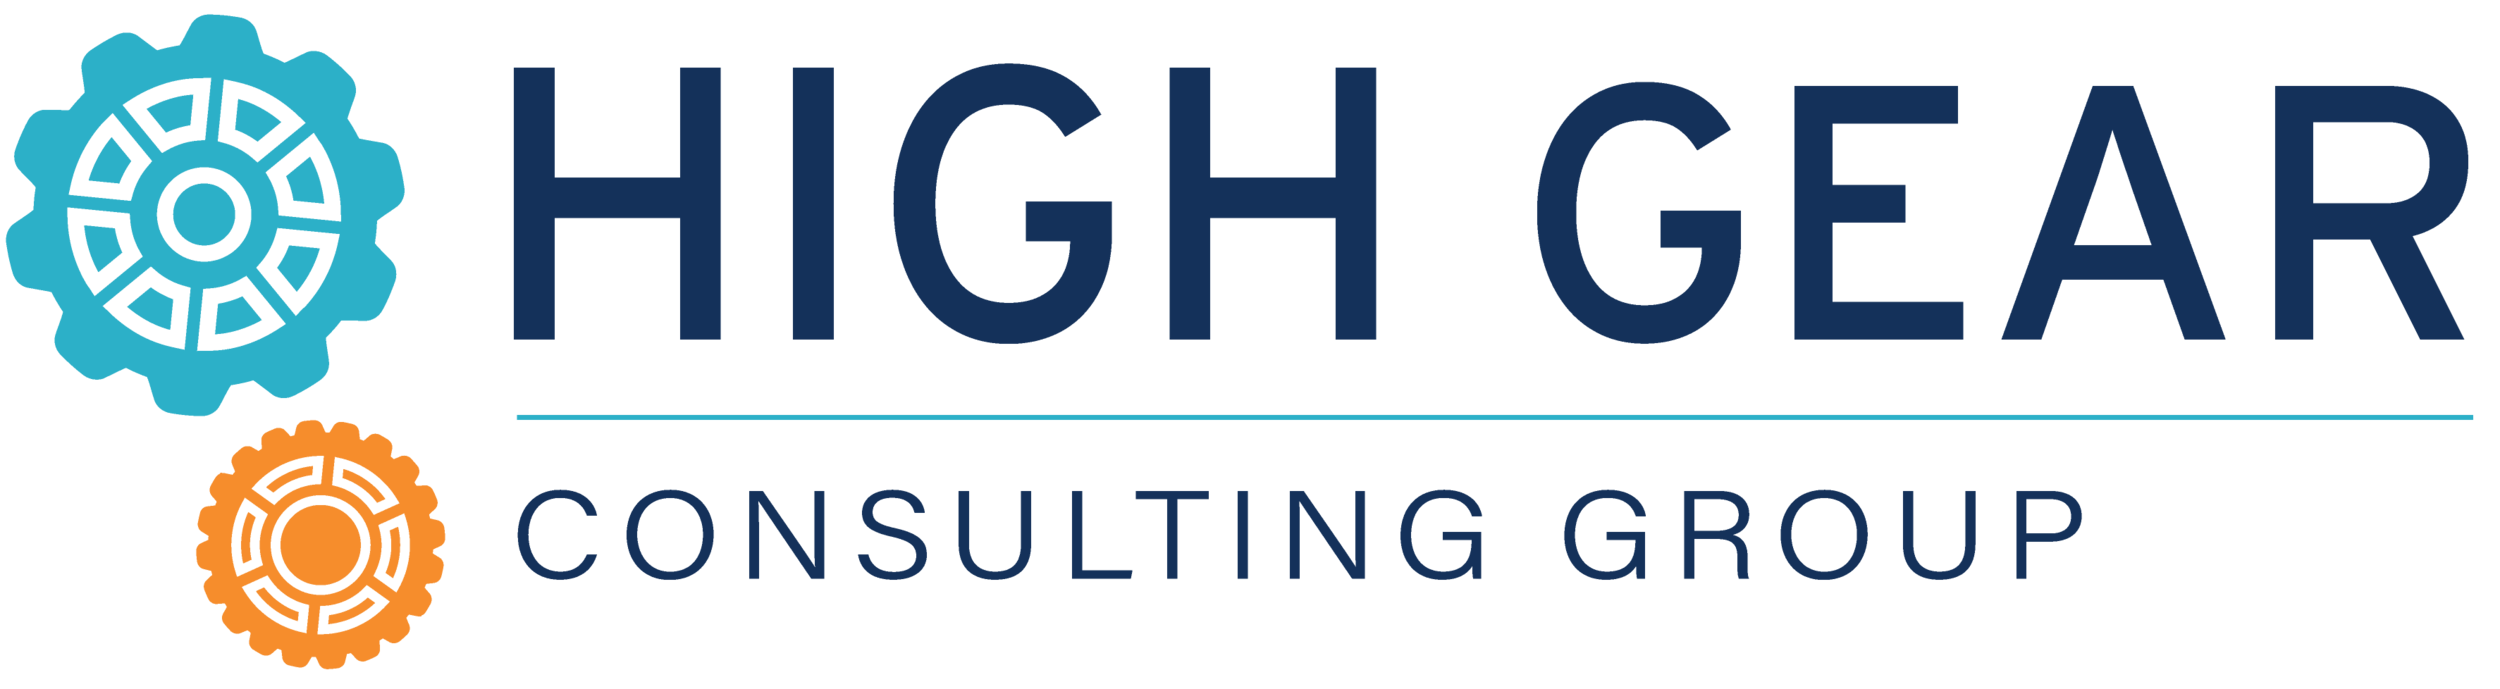 High Gear Consulting Group